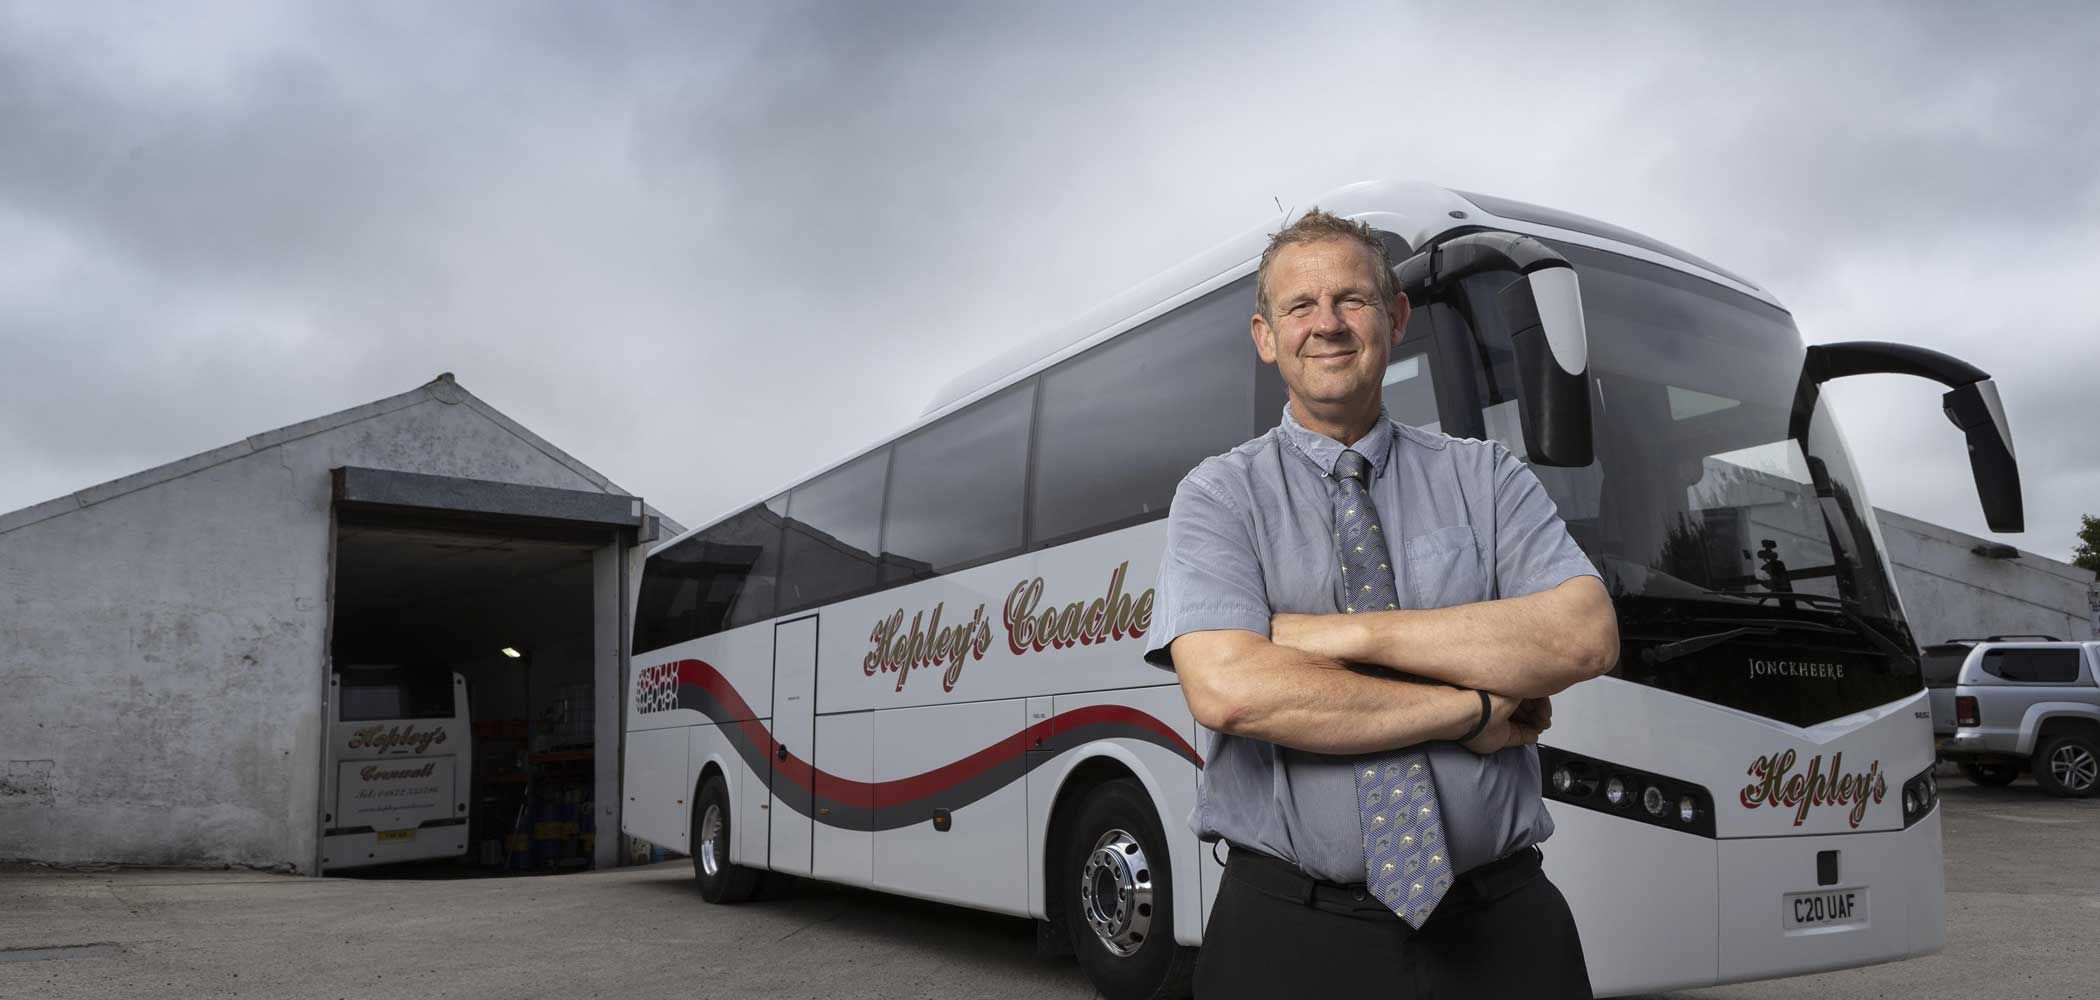 Nicholas Hopley standing in front of a Hopley's coach